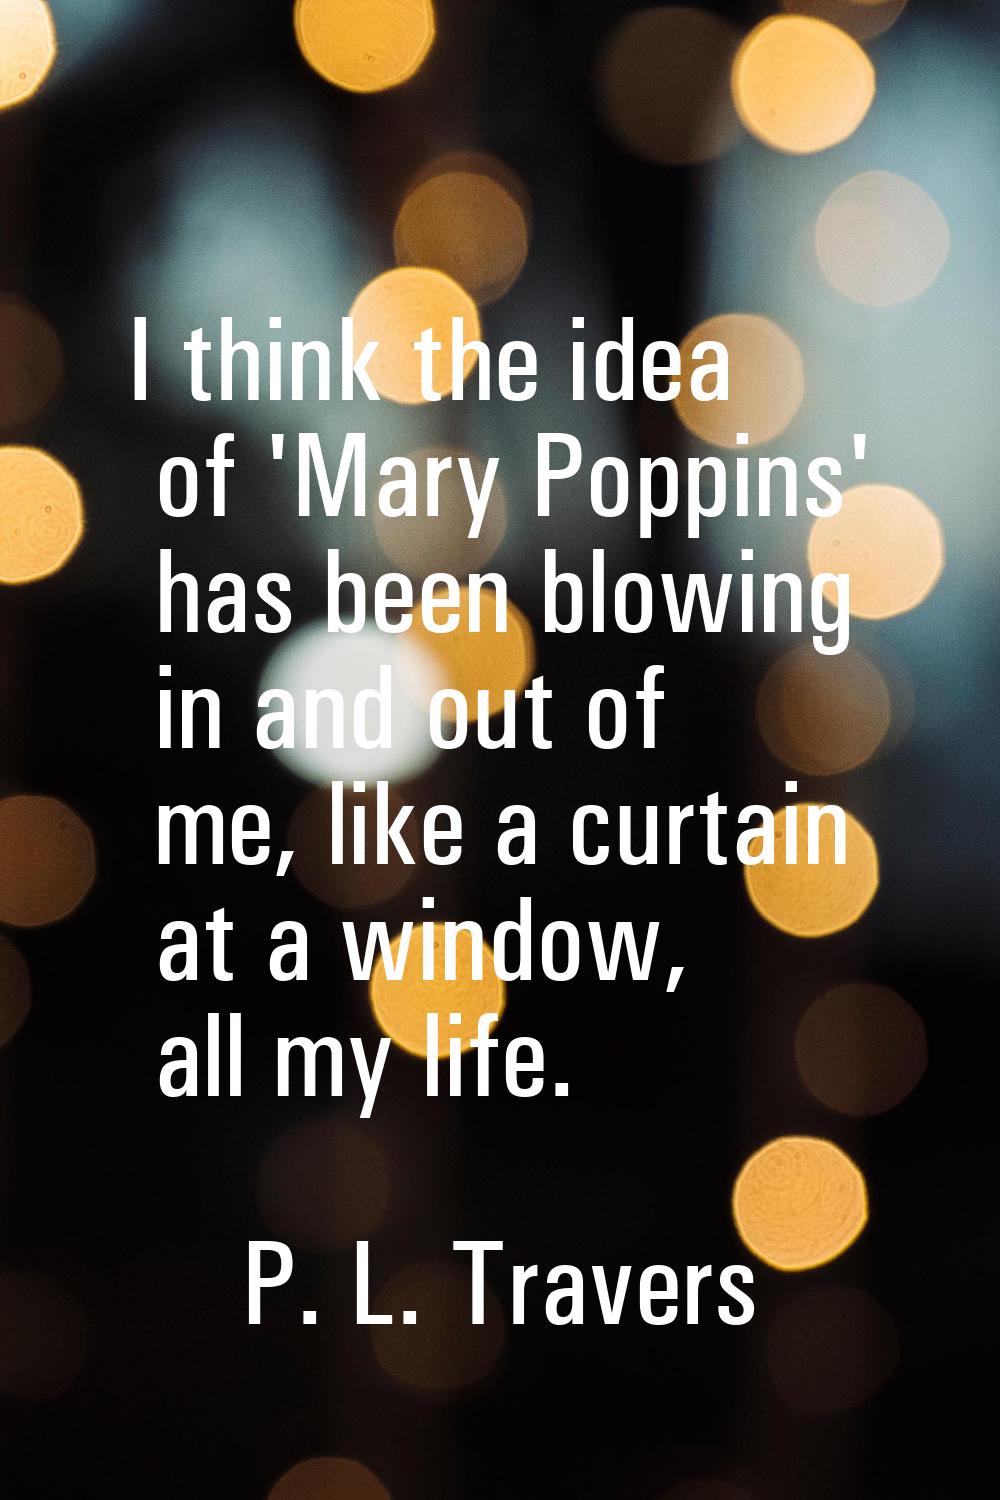 I think the idea of 'Mary Poppins' has been blowing in and out of me, like a curtain at a window, a